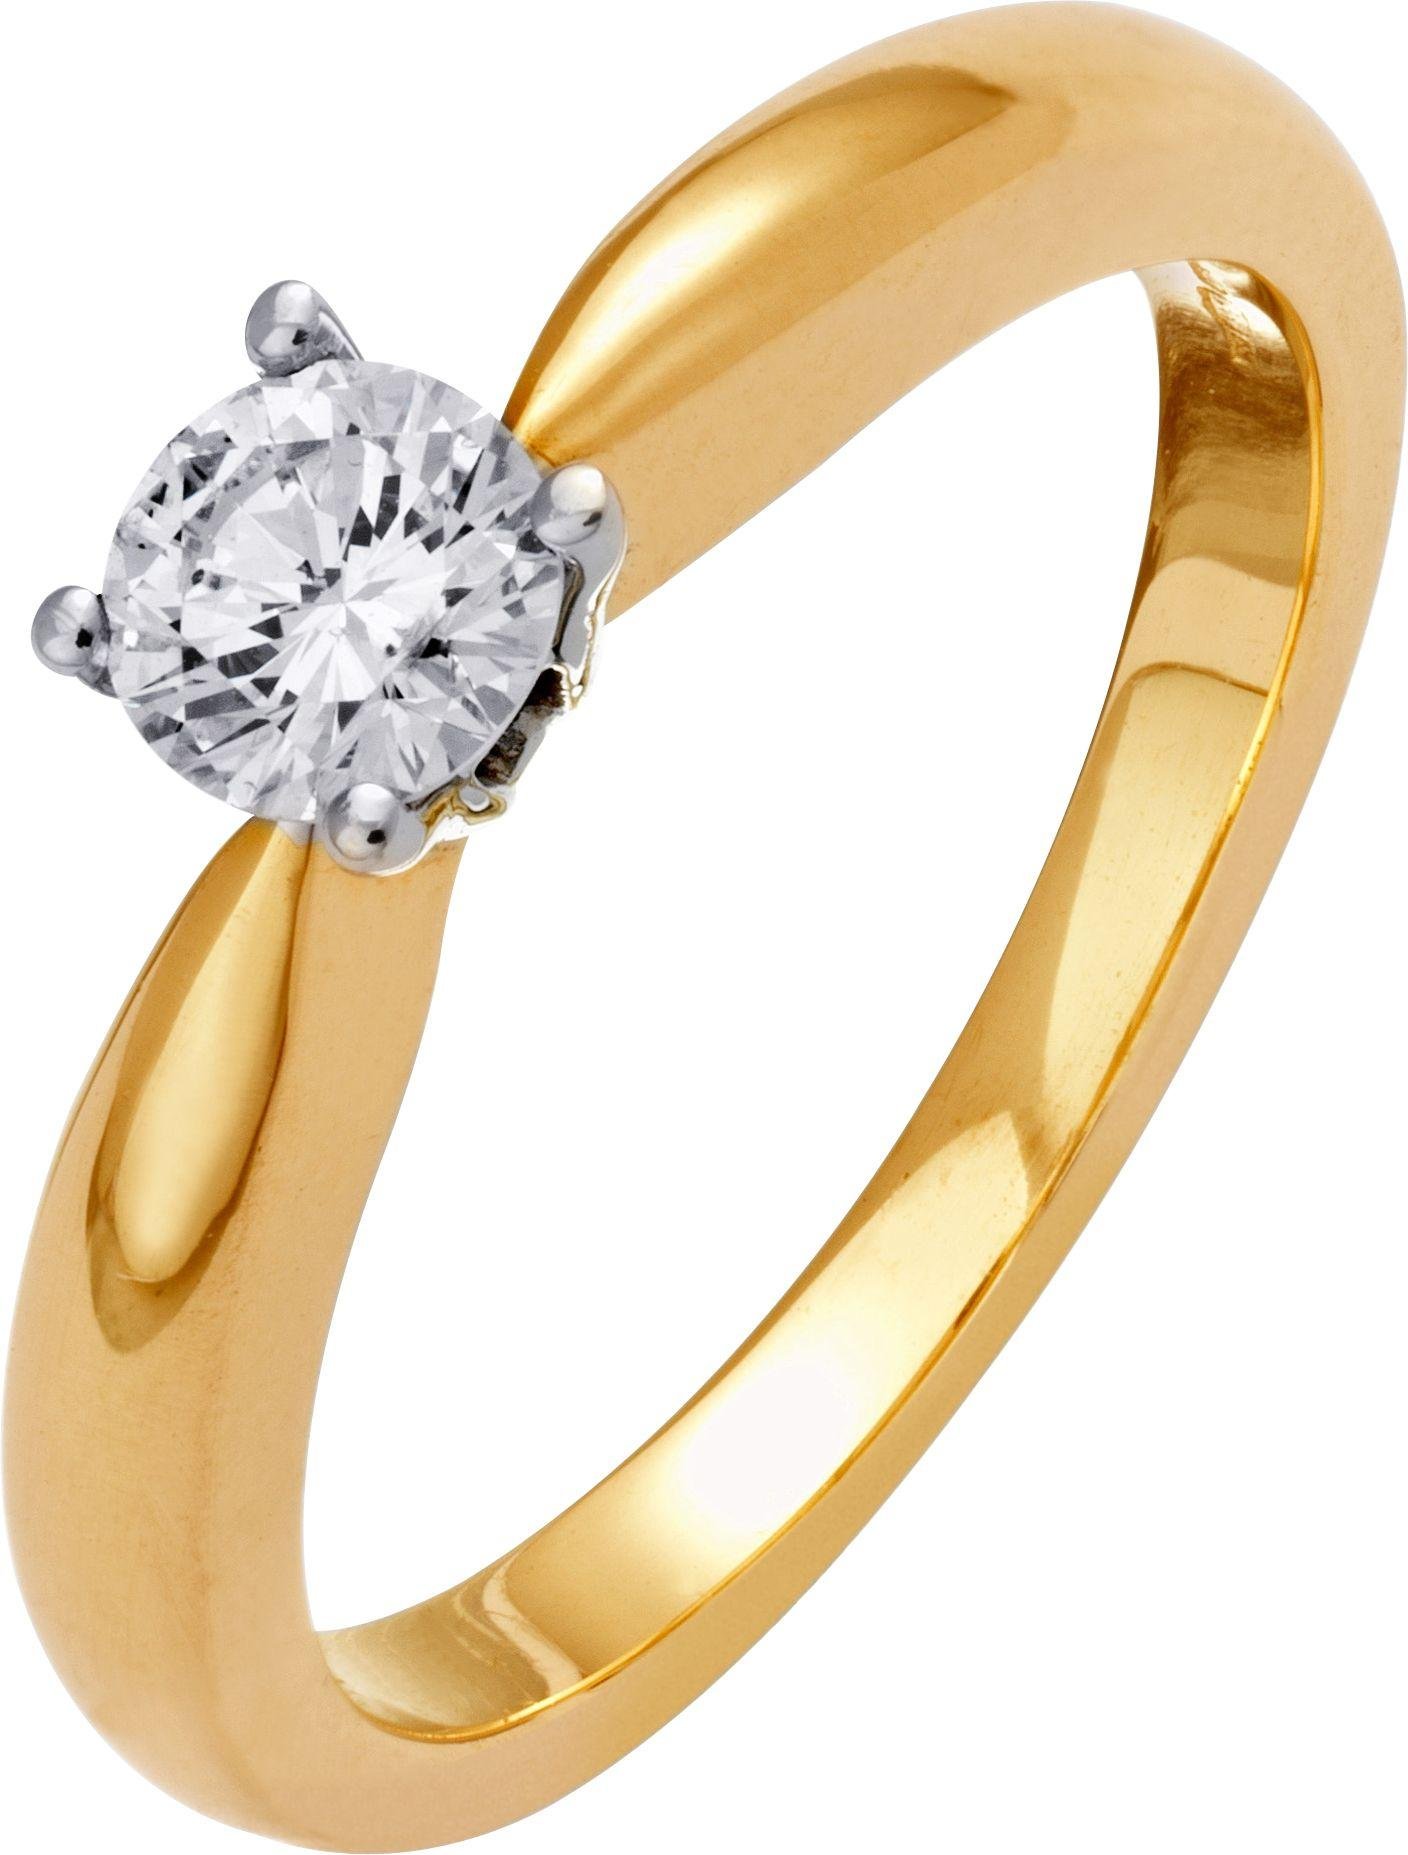 Everlasting Love 9ct Gold 0.33ct Diamond Solitaire Ring - O